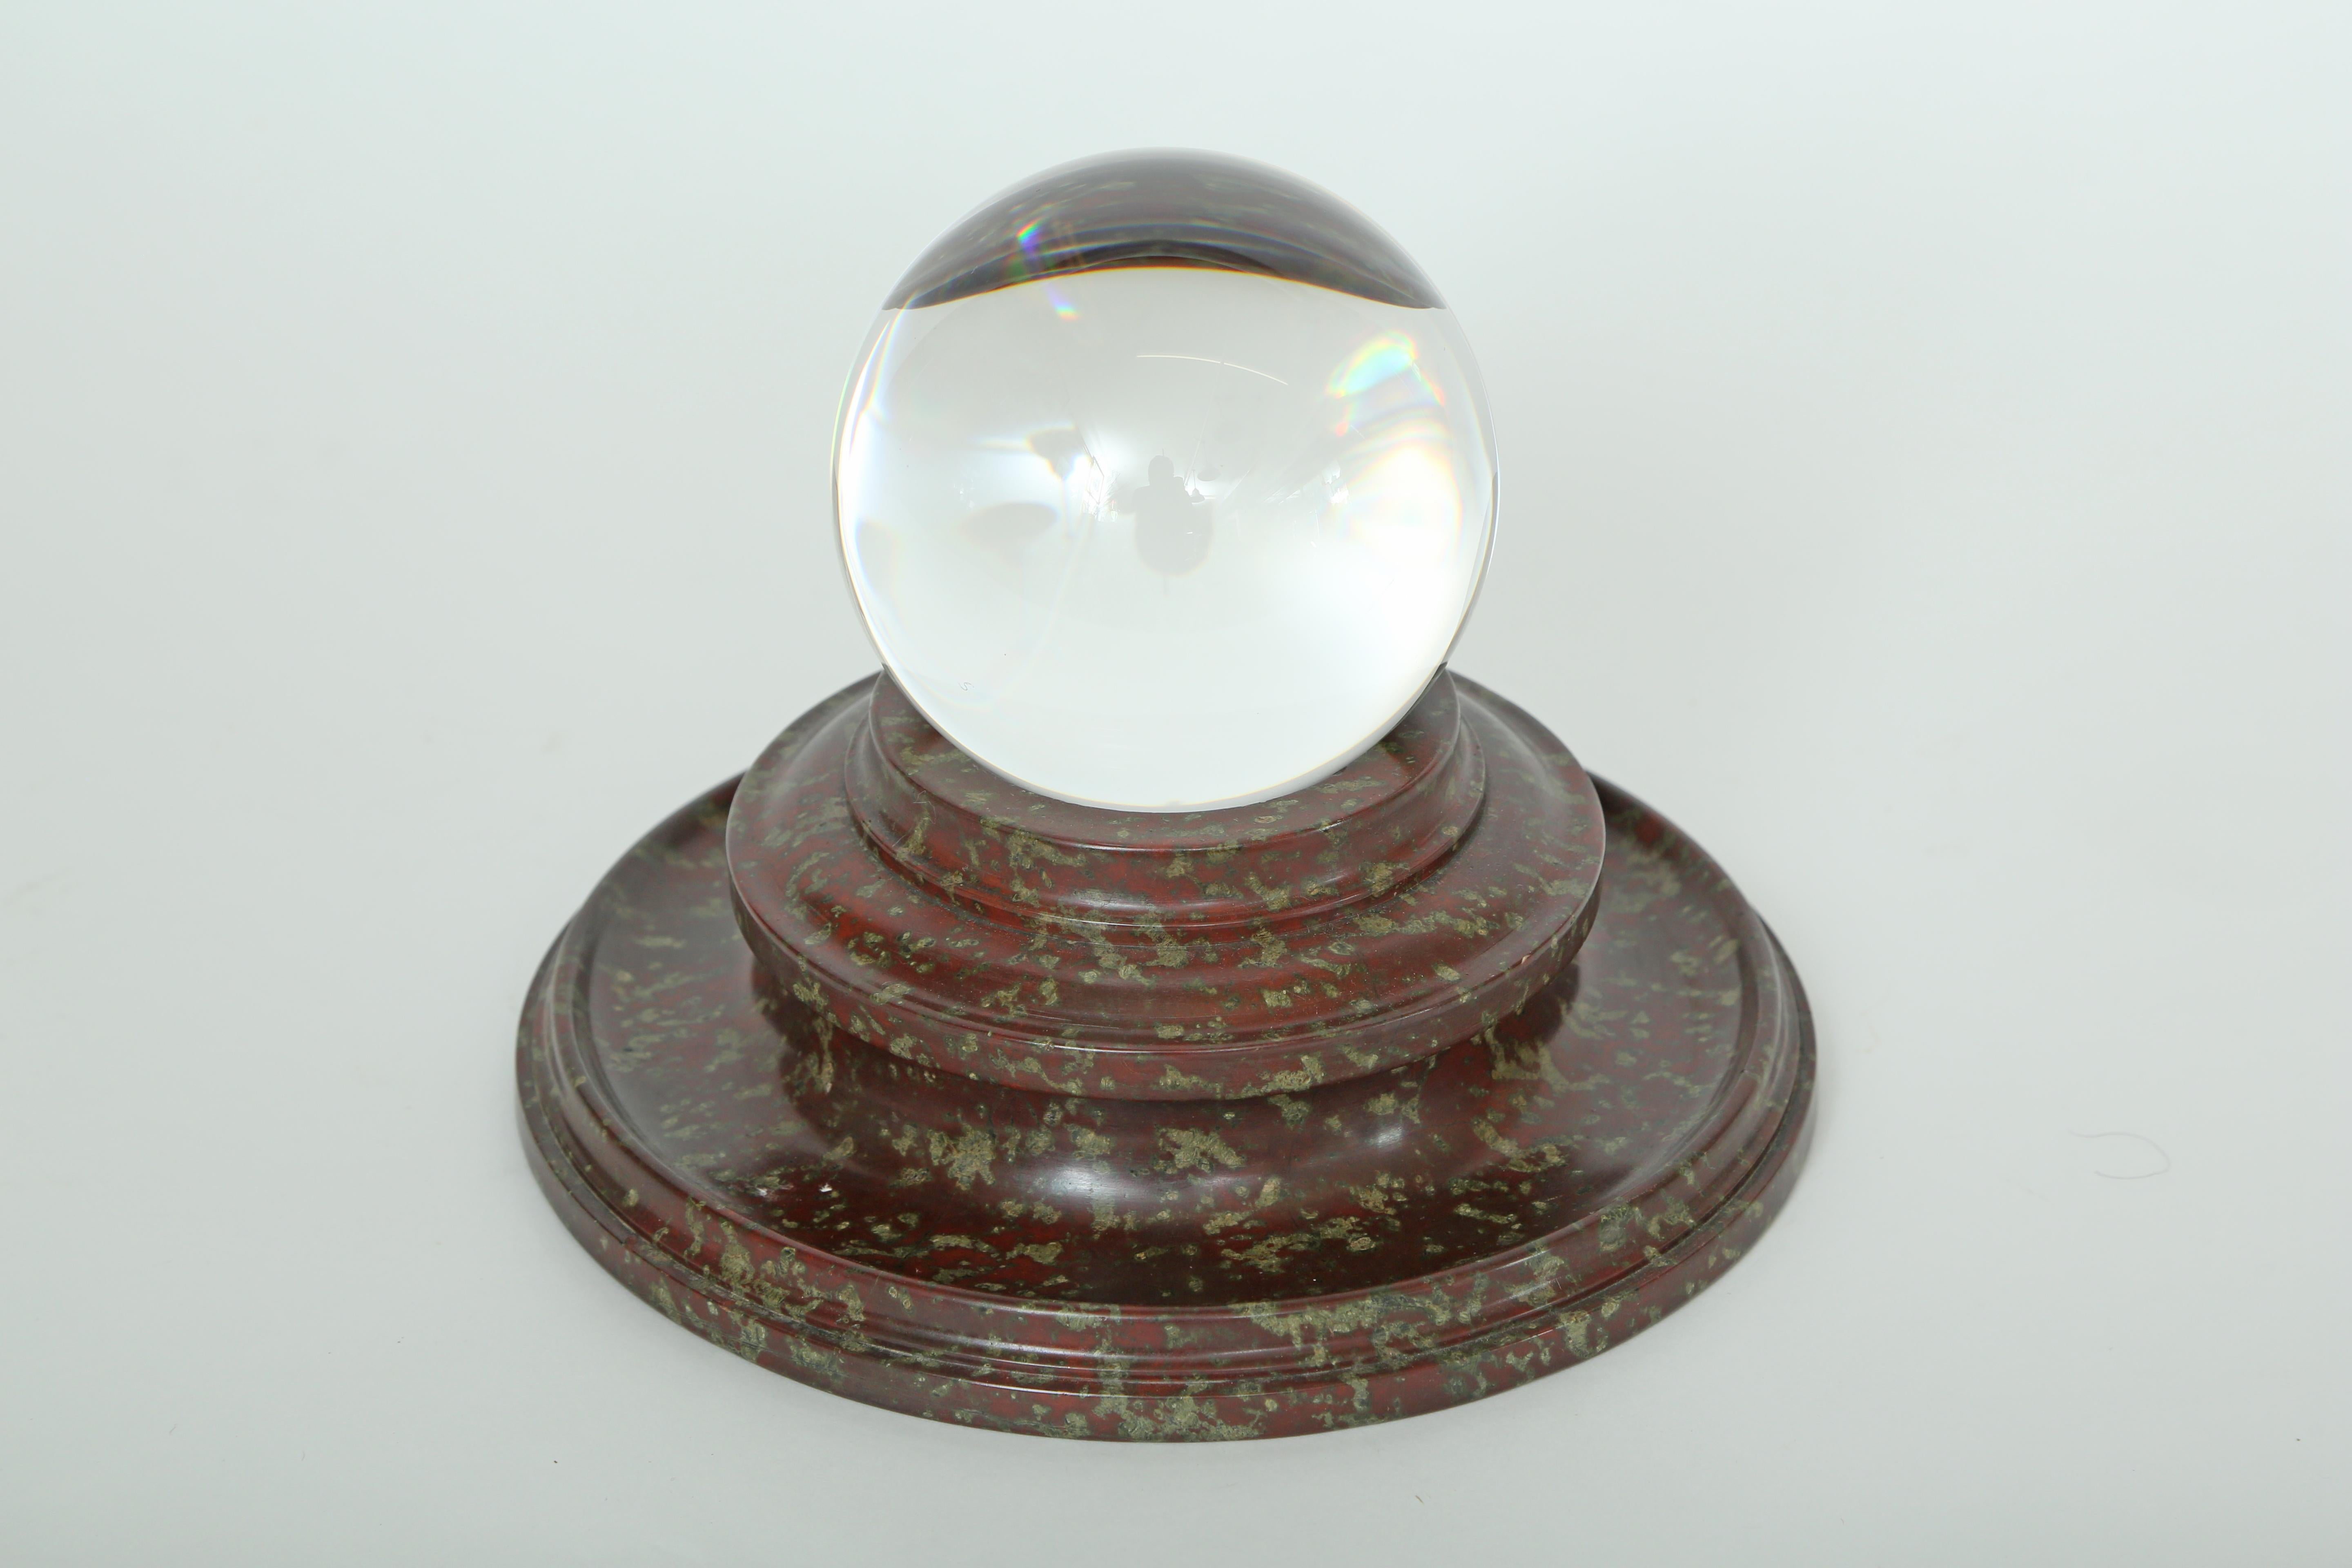 Lathe turned marble stand with crystal orb. A great table decoration for a man's desk or in a library, den and so on.
...... or perhaps you can tell the future by gazing into this crystal ball.